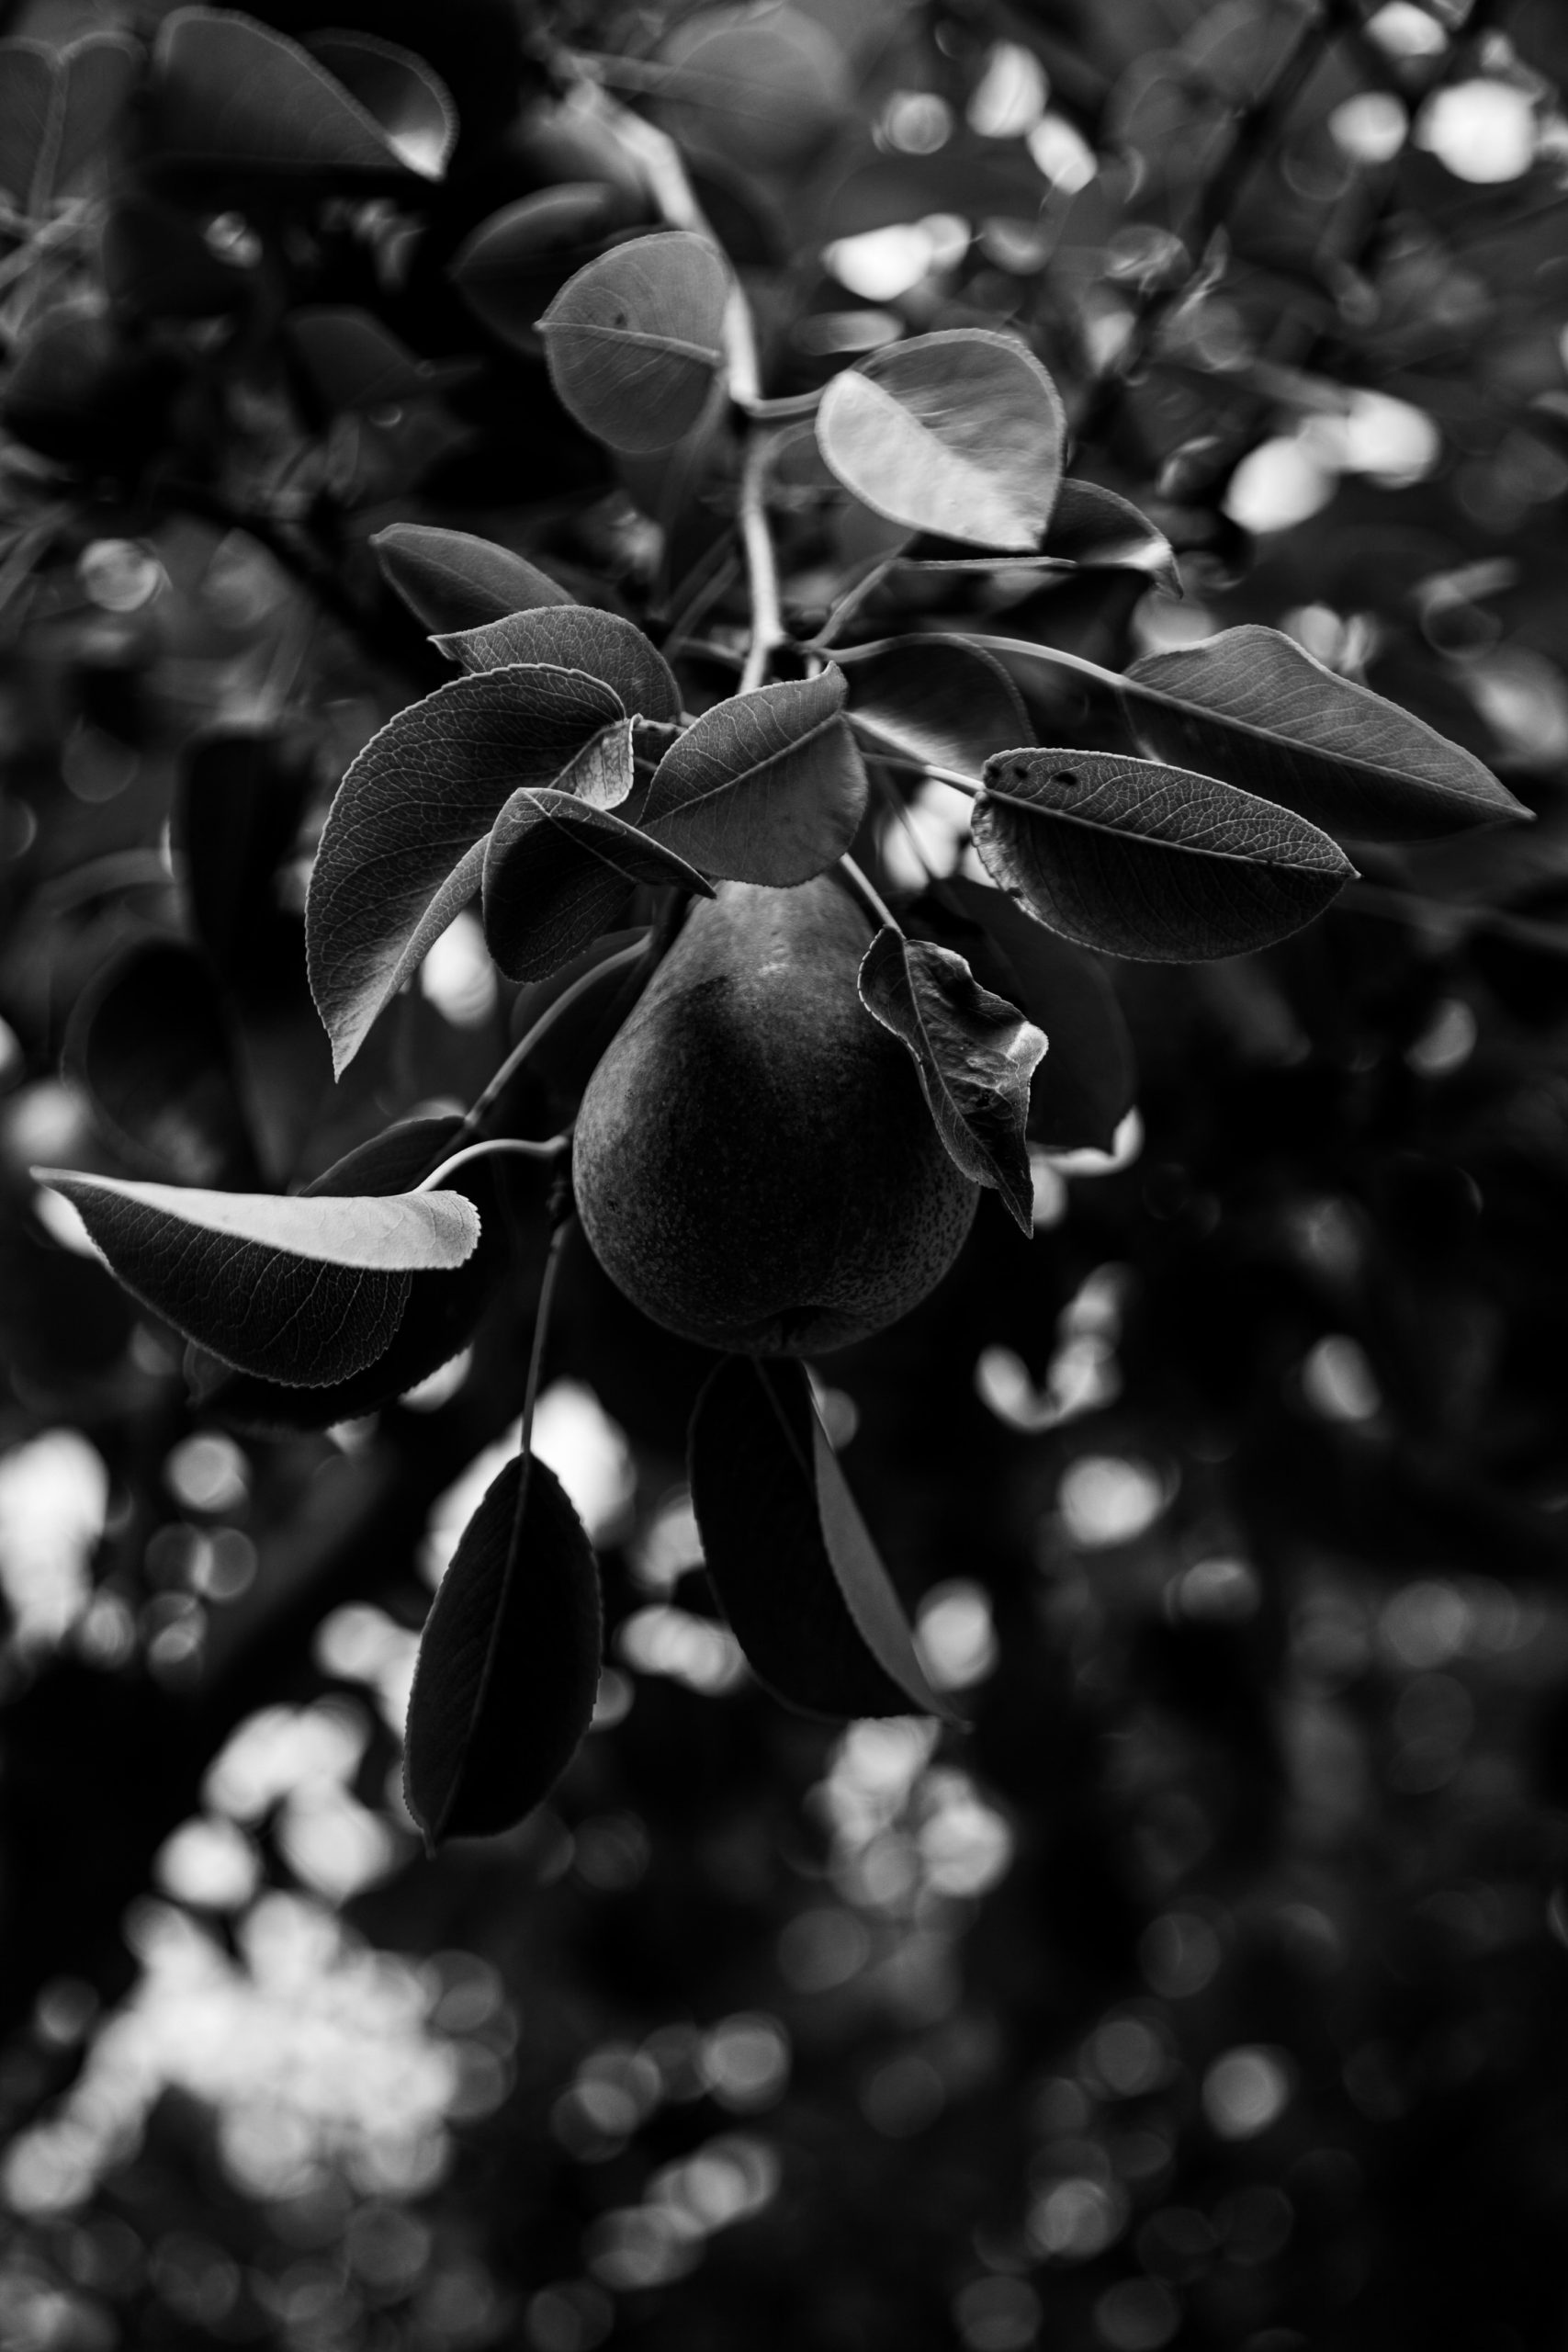 dark image of a pear hanging in a tree